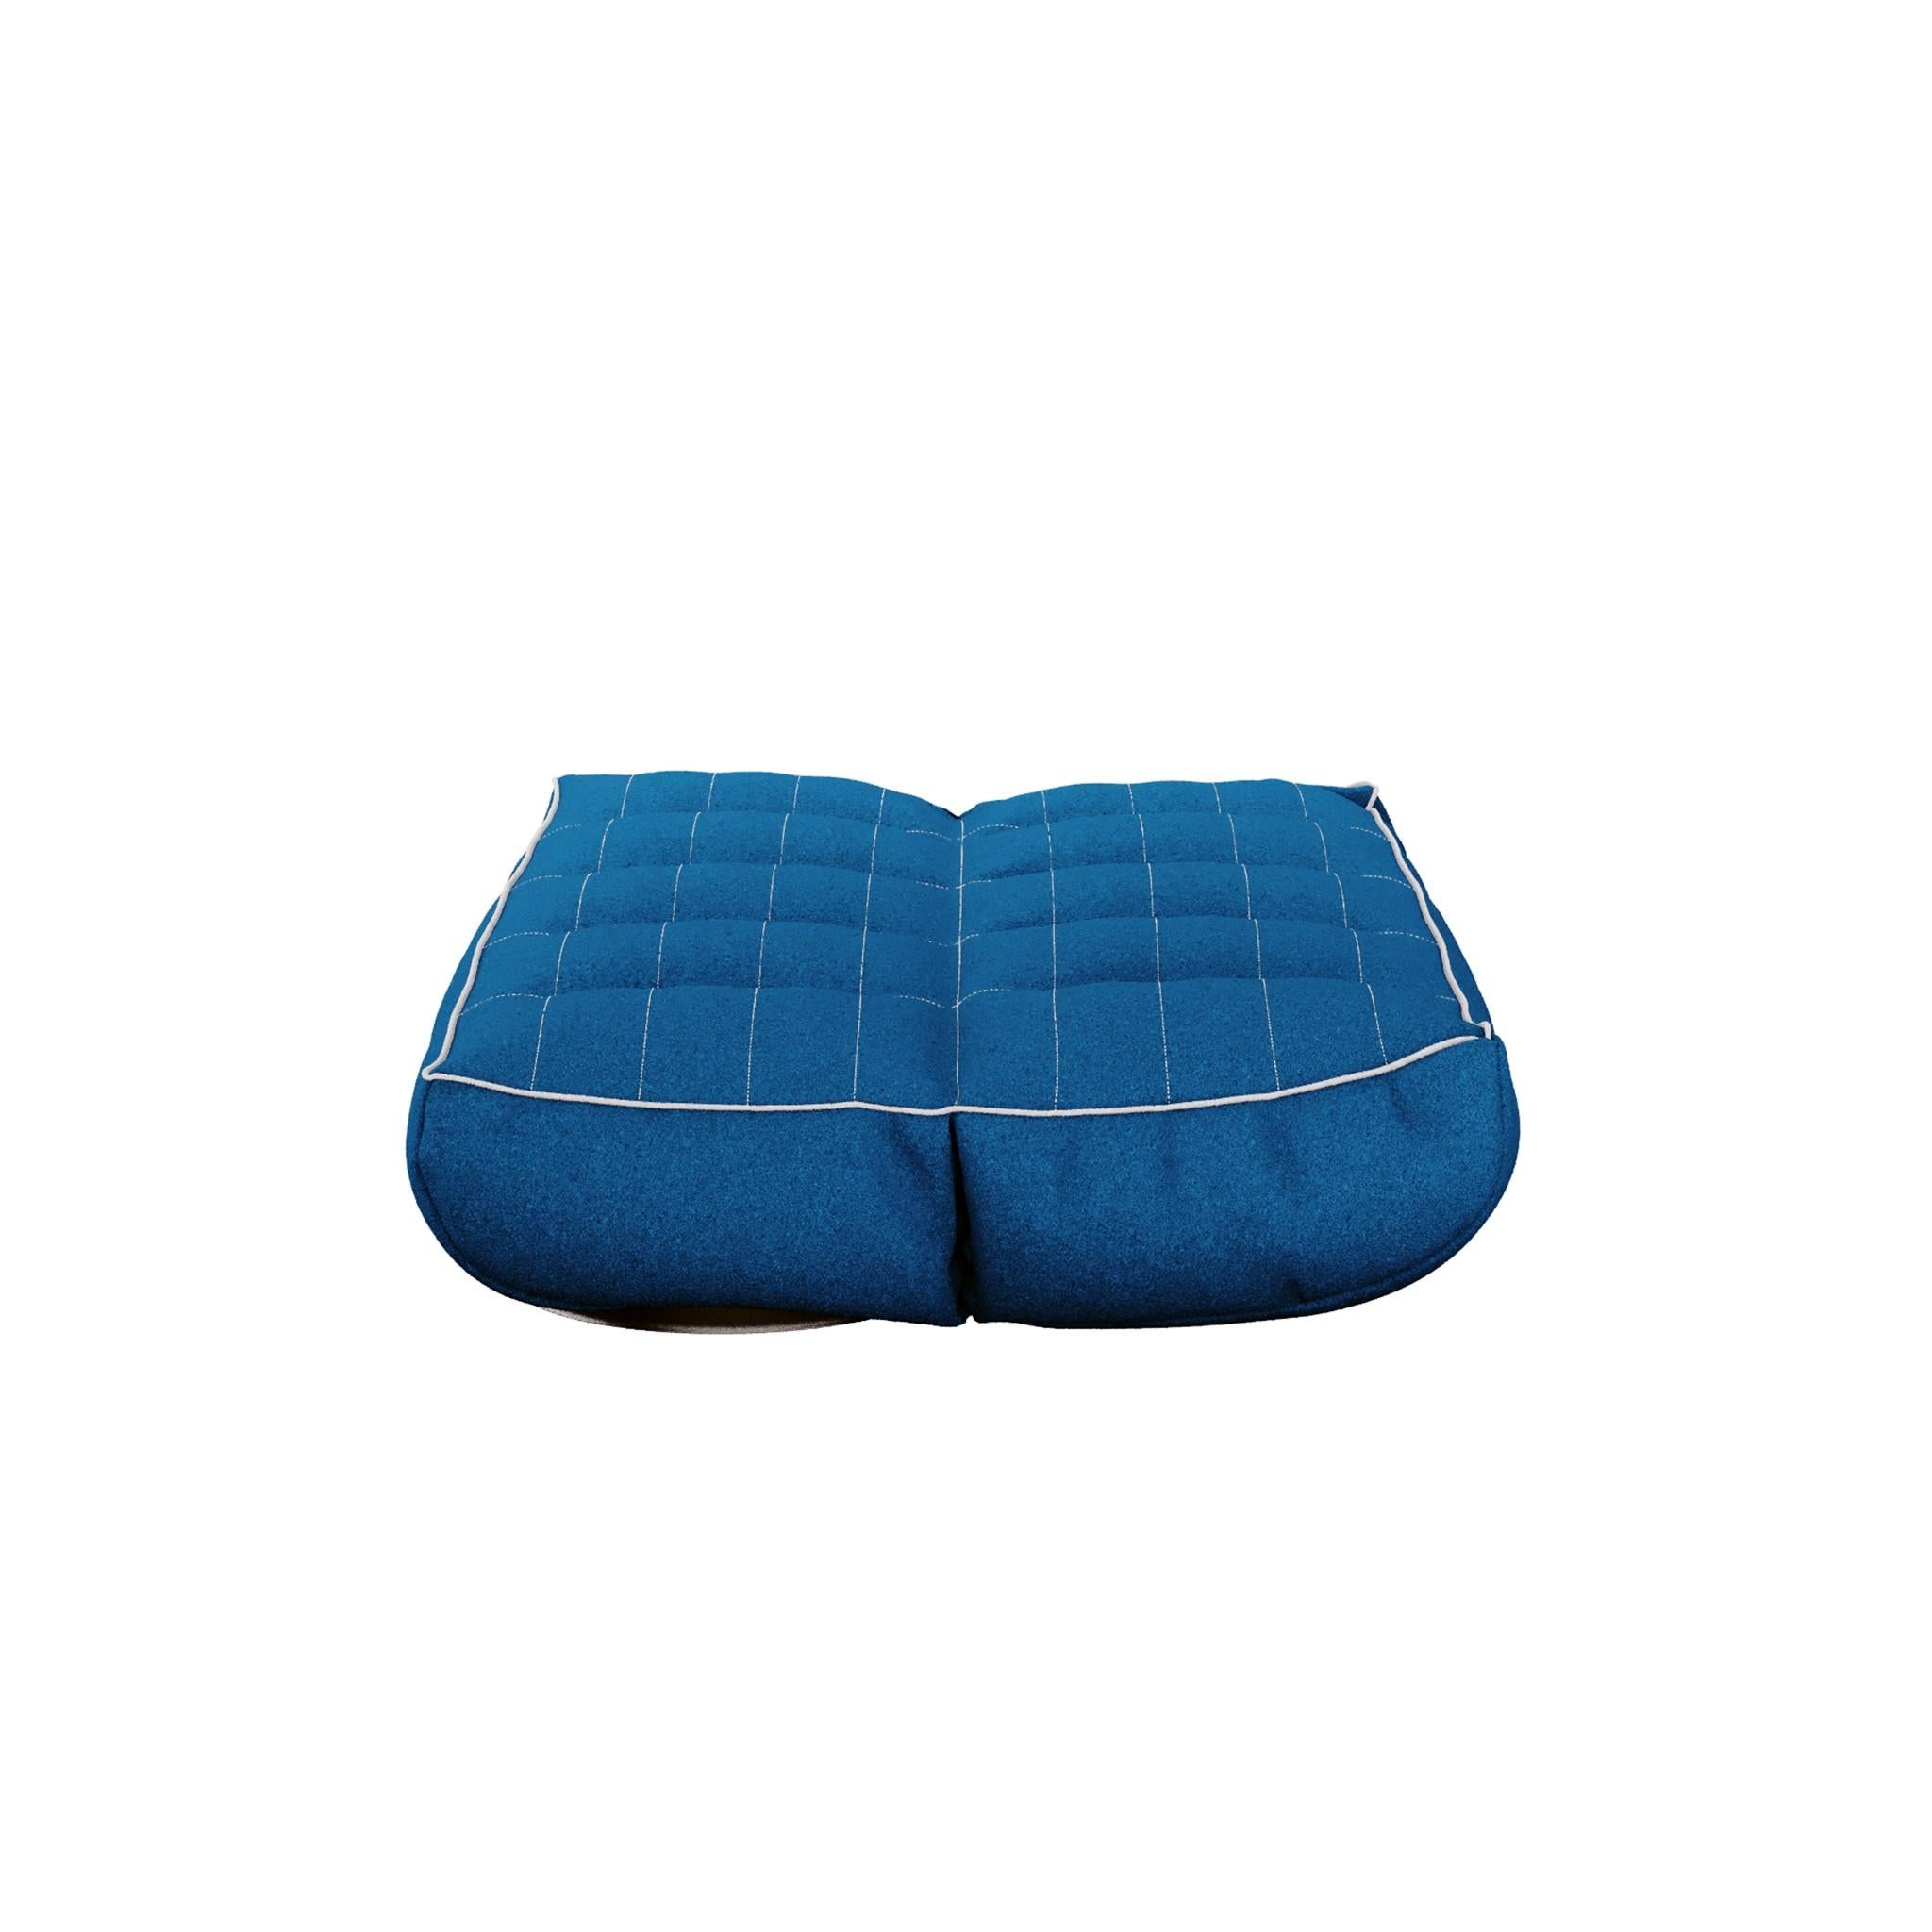 Contemporary Modern Outdoor Sofa Folding Daybed Upholstered Blue Bouclé White Details For Sale